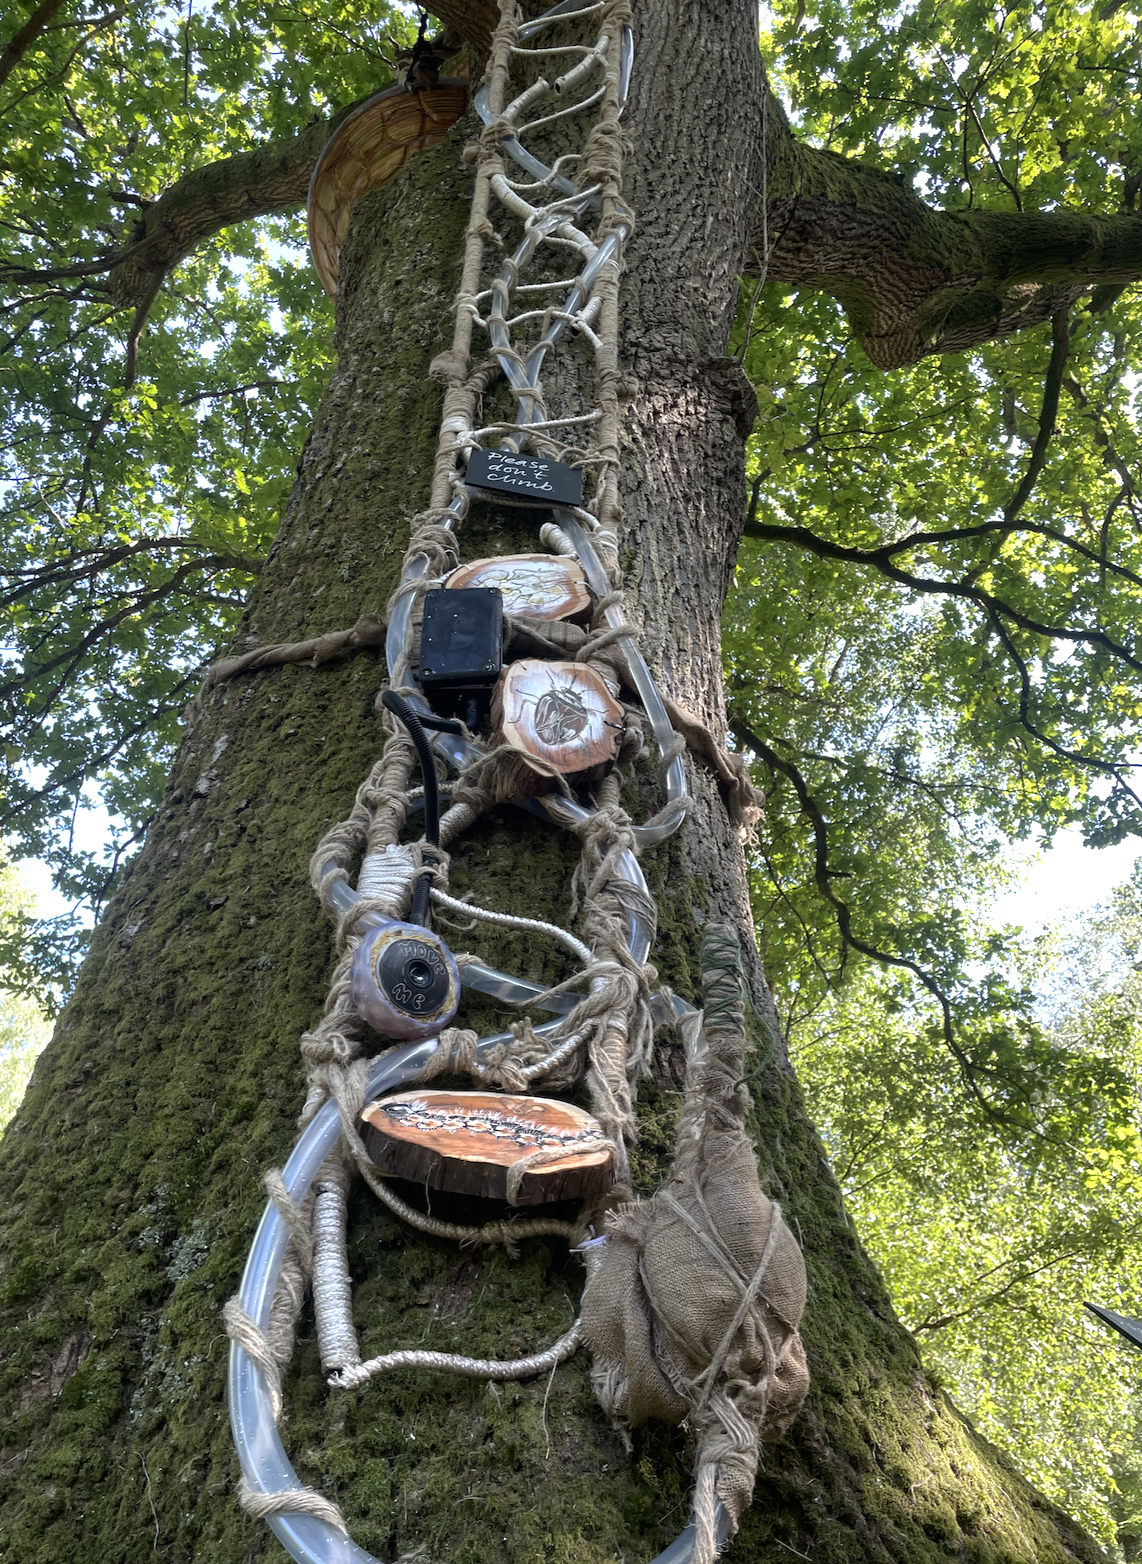 An Oak tree with an organic sculpture attached to the trunk